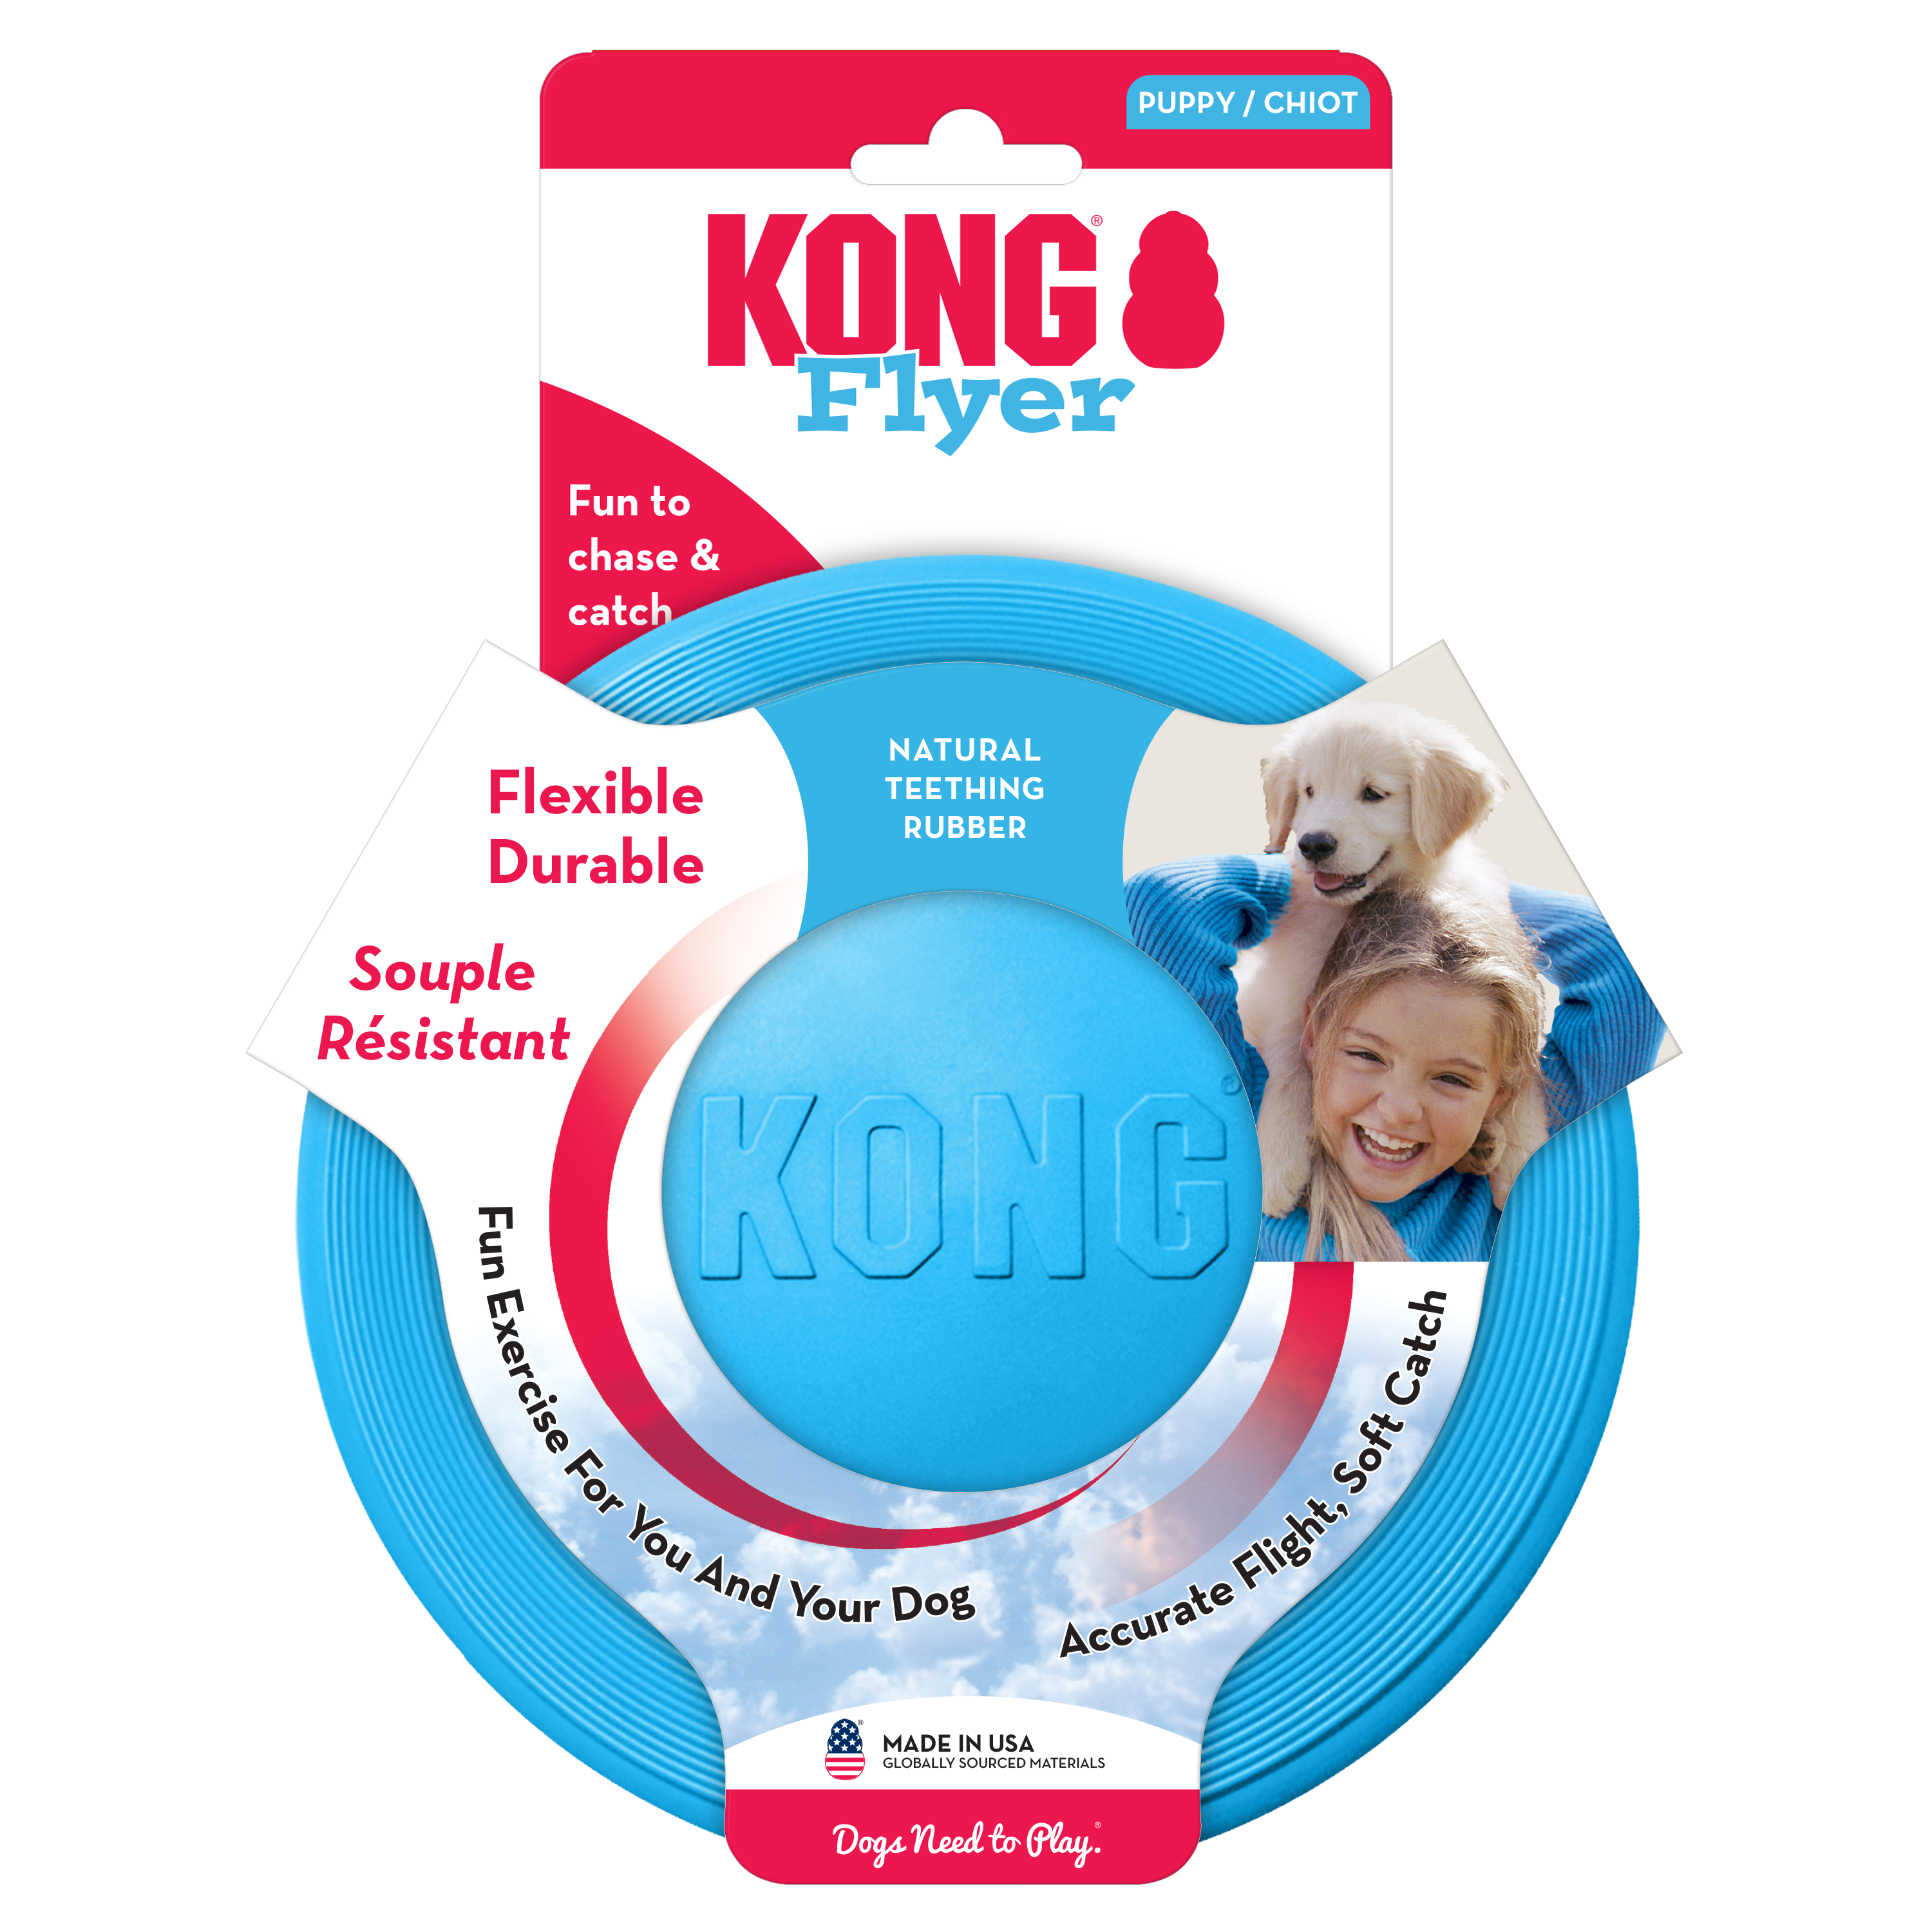 KONG Puppy Flyer onpack product image